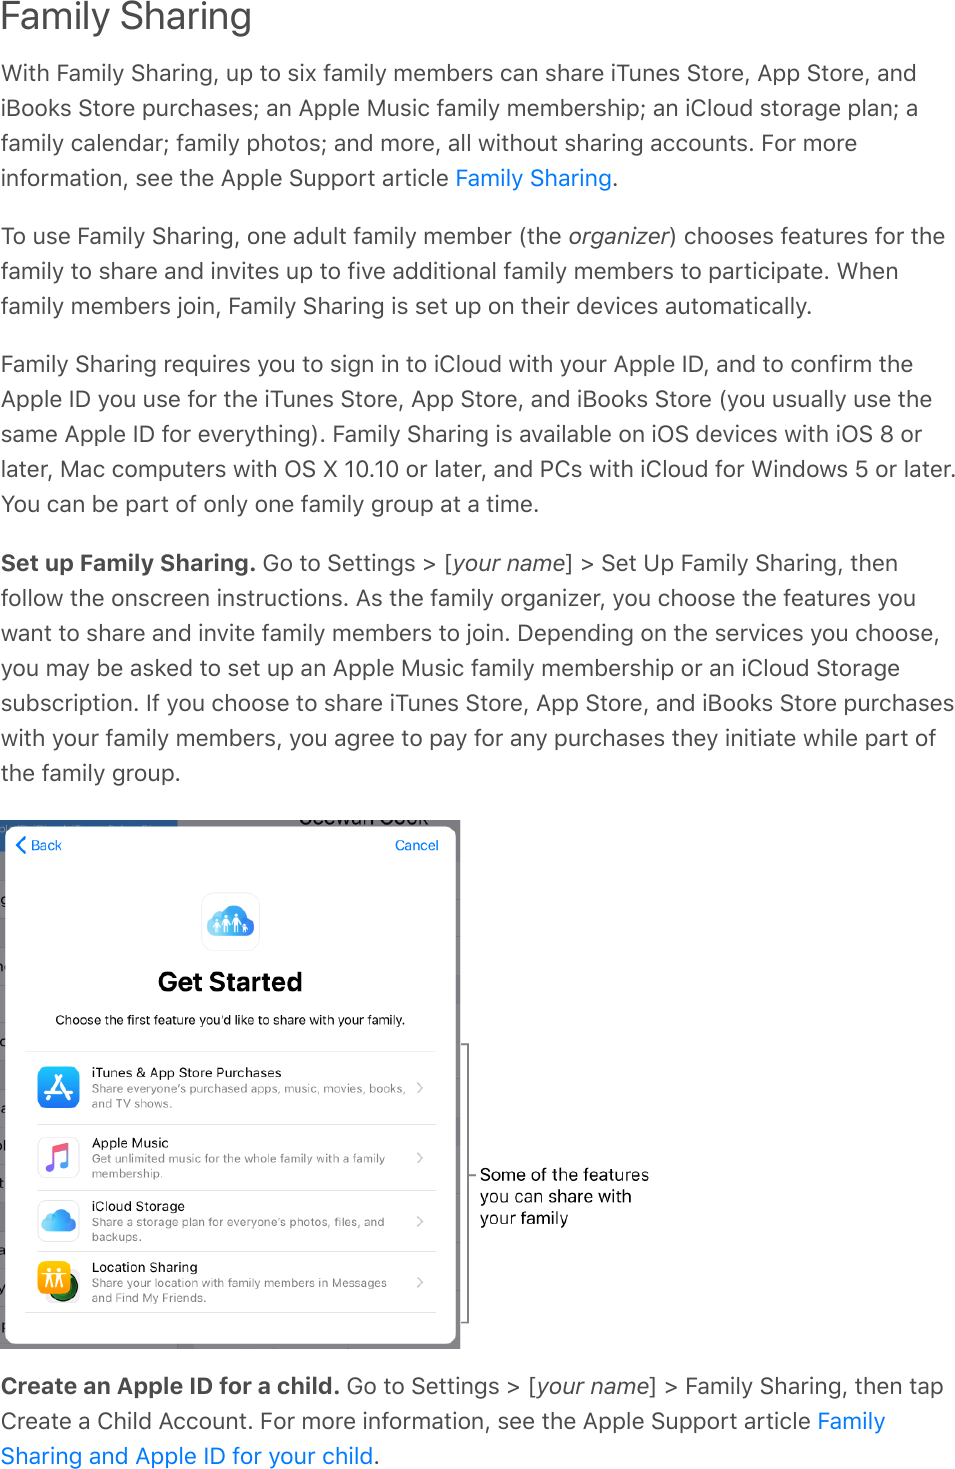 Family SharingWith Family Sharing, up to six family members can share iTunes Store, App Store, andiBooks Store purchases; an Apple Music family membership; an iCloud storage plan; afamily calendar; family photos; and more, all without sharing accounts. For moreinformation, see the Apple Support article  .To use Family Sharing, one adult family member (the organizer) chooses features for thefamily to share and invites up to five additional family members to participate. Whenfamily members join, Family Sharing is set up on their devices automatically.Family Sharing requires you to sign in to iCloud with your Apple ID, and to confirm theApple ID you use for the iTunes Store, App Store, and iBooks Store (you usually use thesame Apple ID for everything). Family Sharing is available on iOS devices with iOS 8 orlater, Mac computers with OS X 10.10 or later, and PCs with iCloud for Windows 5 or later.You can be part of only one family group at a time.Set up Family Sharing. Go to Settings &gt; [your name] &gt; Set Up Family Sharing, thenfollow the onscreen instructions. As the family organizer, you choose the features youwant to share and invite family members to join. Depending on the services you choose,you may be asked to set up an Apple Music family membership or an iCloud Storagesubscription. If you choose to share iTunes Store, App Store, and iBooks Store purchaseswith your family members, you agree to pay for any purchases they initiate while part ofthe family group.Create an Apple ID for a child. Go to Settings &gt; [your name] &gt; Family Sharing, then tapCreate a Child Account. For more information, see the Apple Support article .Family SharingFamilySharing and Apple ID for your child